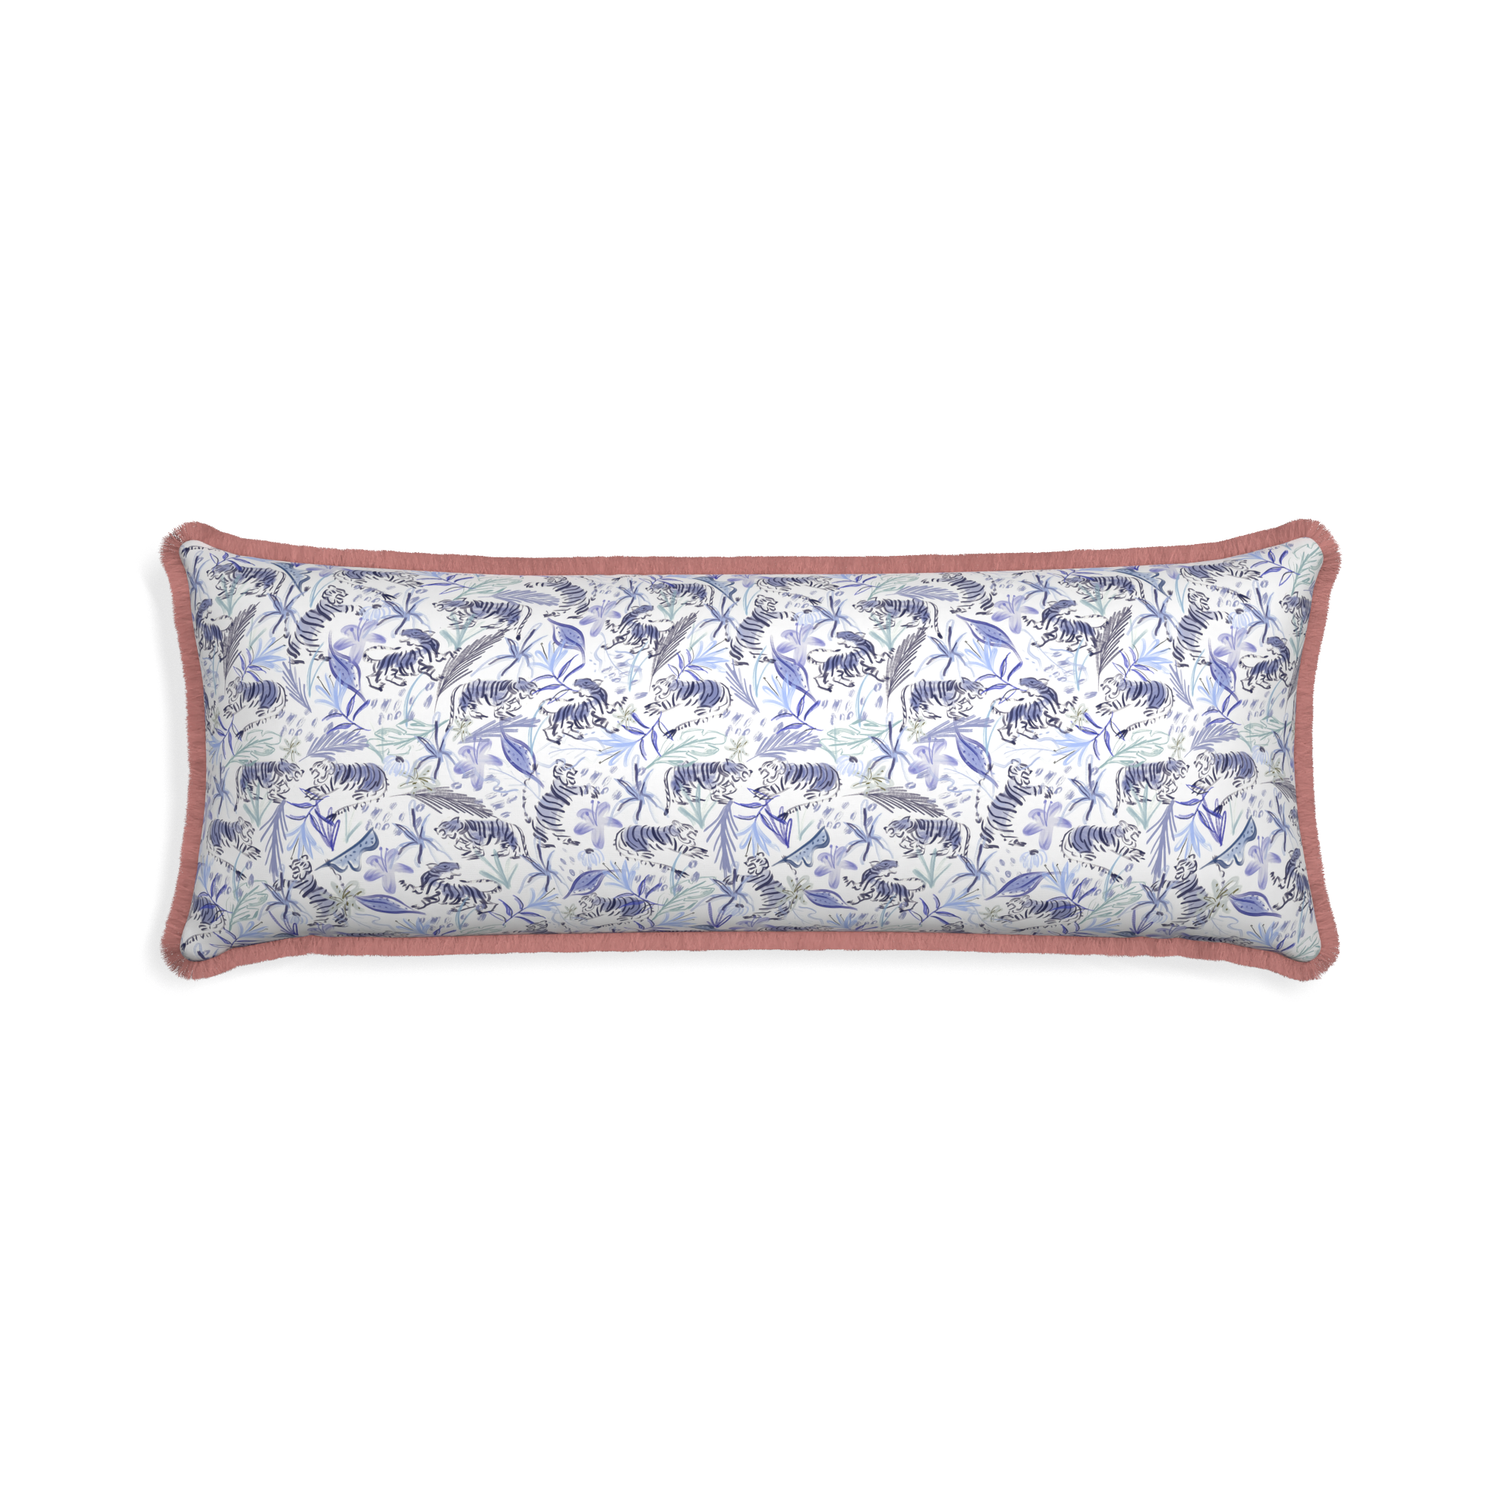 Xl-lumbar frida blue custom blue with intricate tiger designpillow with d fringe on white background